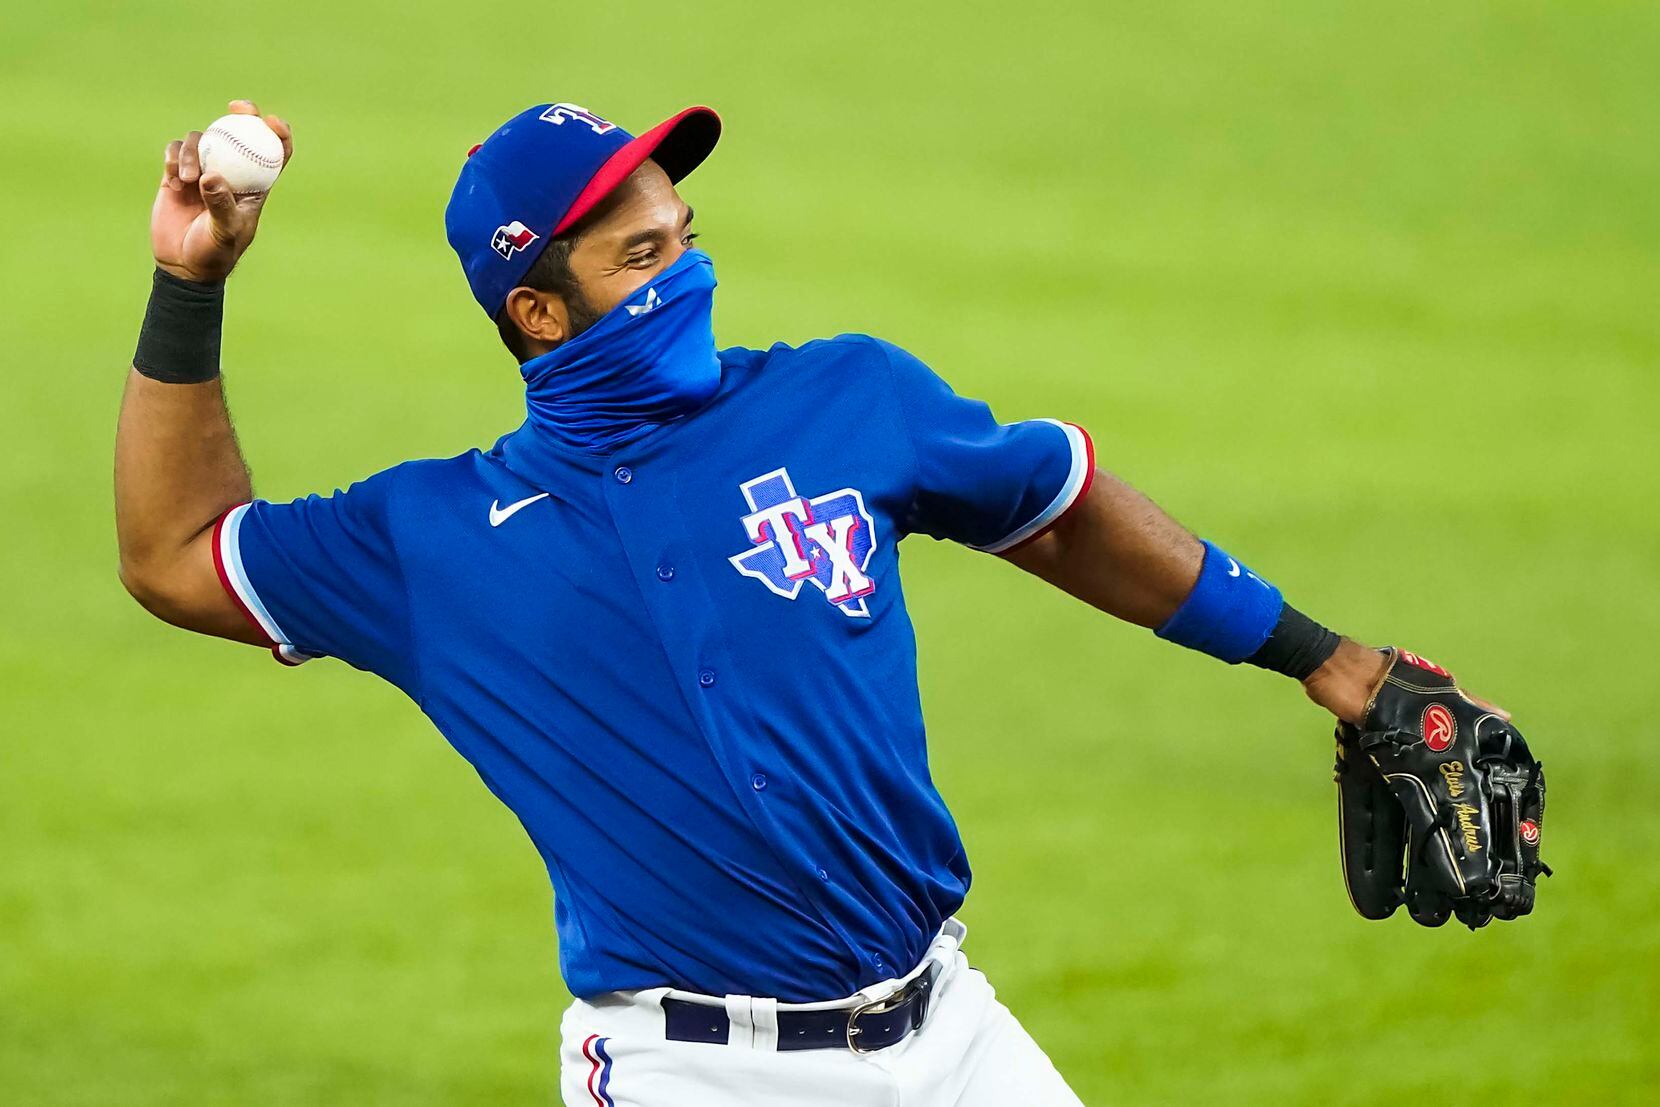 After his breakout 2020 season, anything is possible for Rangers